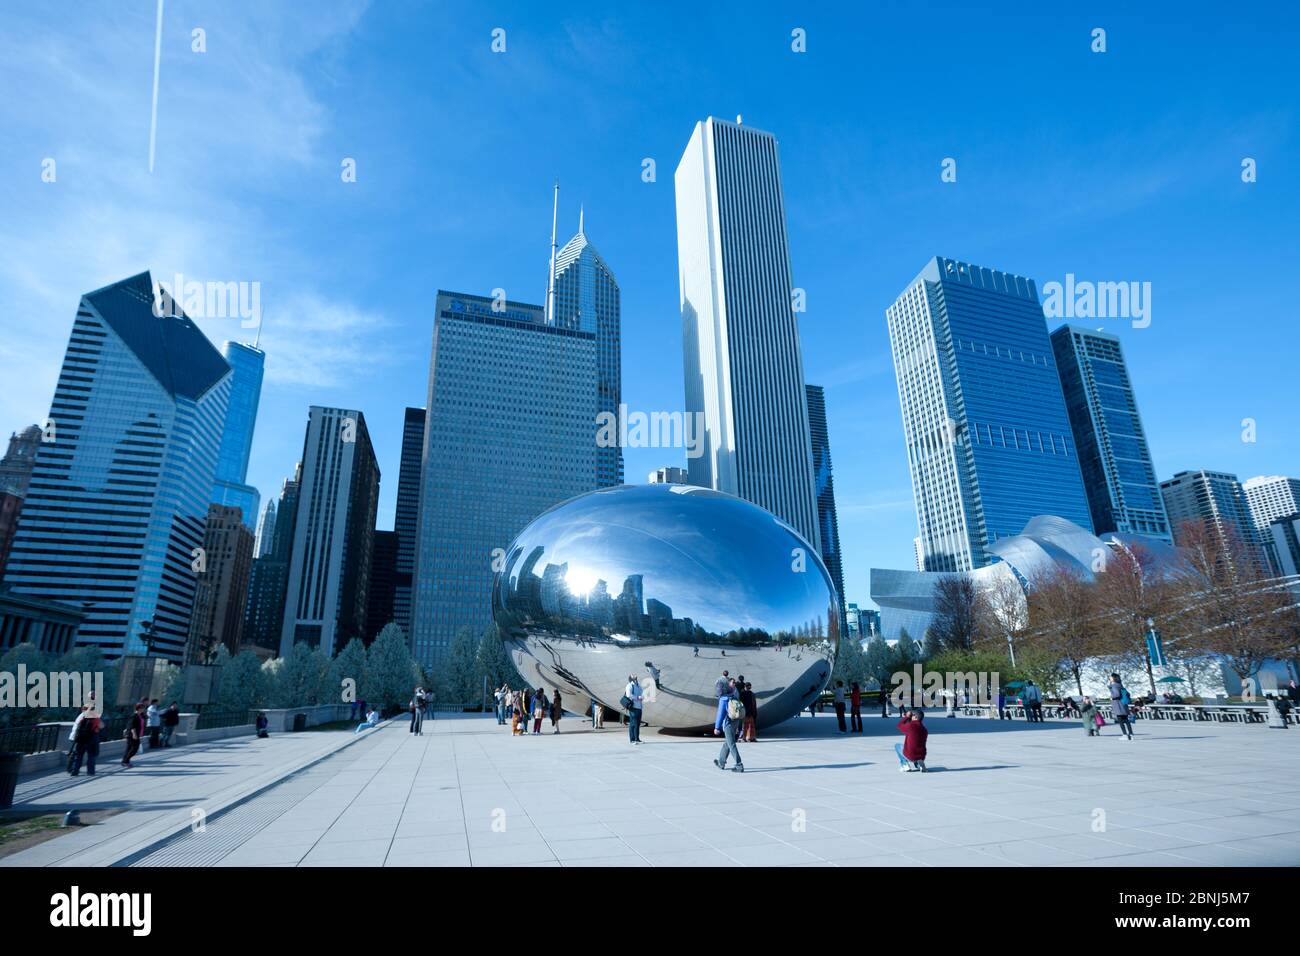 Chicago, Illinois, United States - Skyline of buildings and tourists at Millennium Park at downtown. Stock Photo